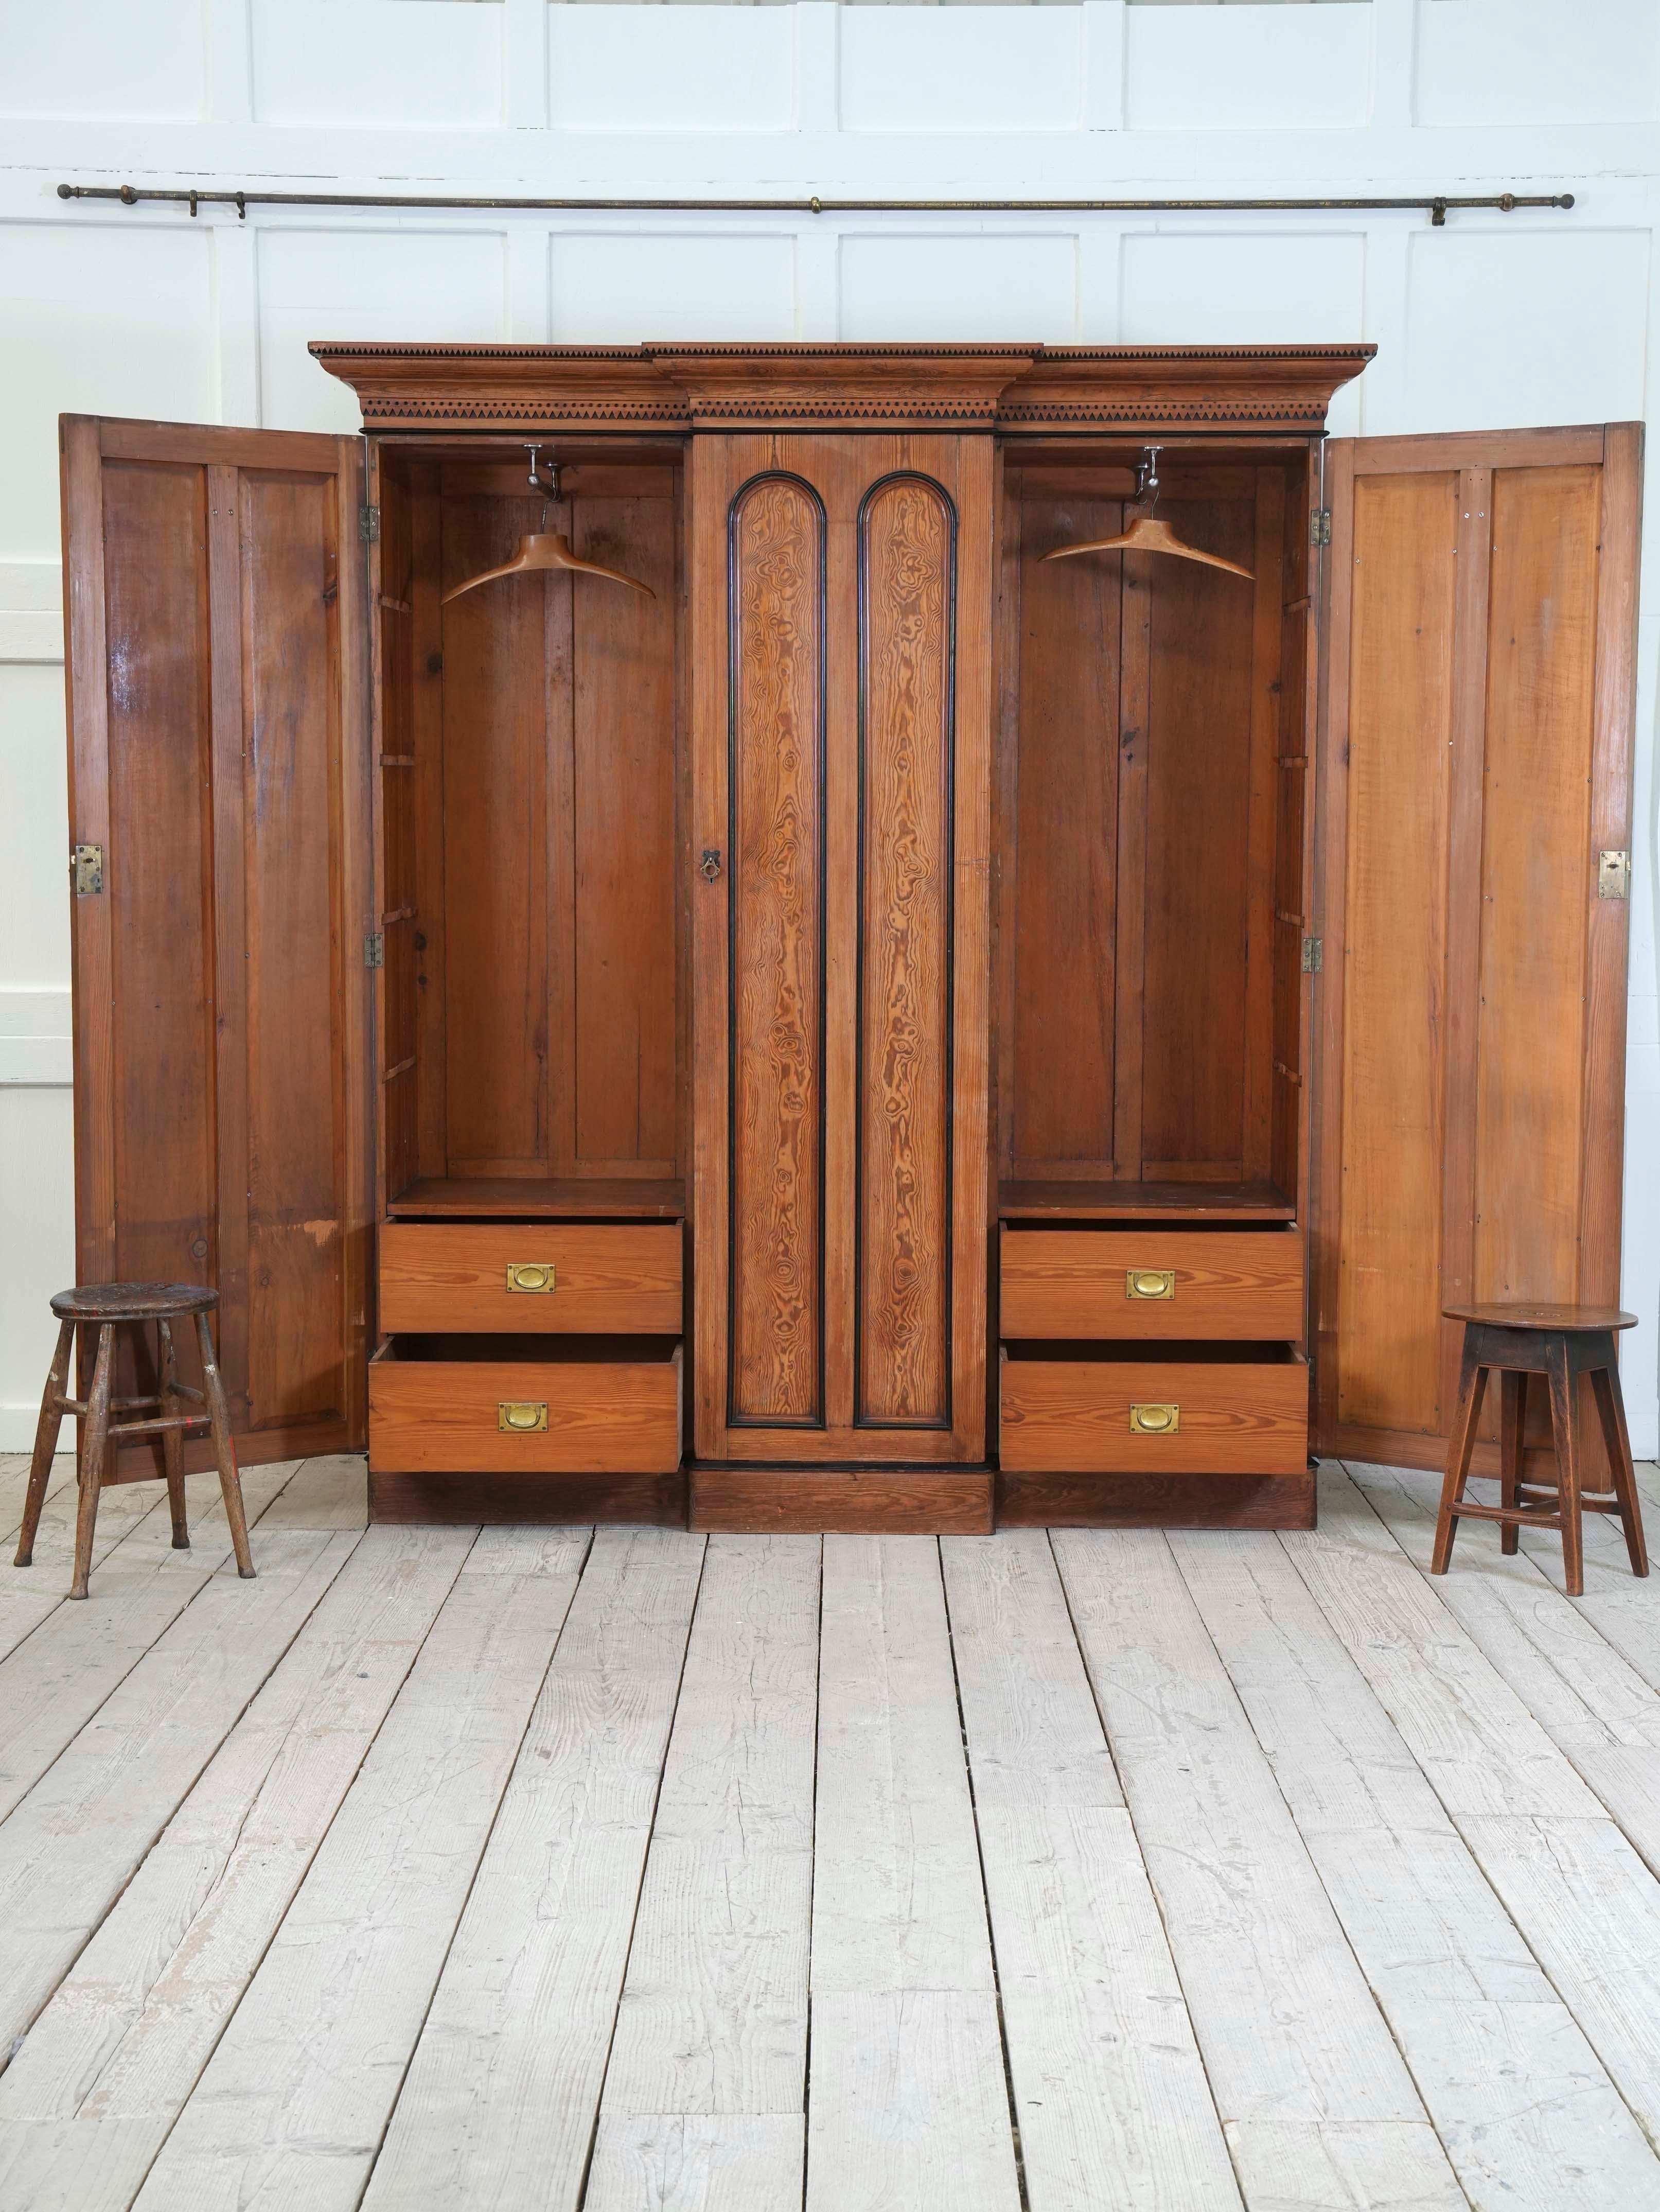 Well figured pine with ebonized detail to the cornice, door fronts and plinth, original brass door furnishings, hanging space above drawers and sliding linen trays.
English, circa 1870.
H: 228 W: 184 D: 68 CM
H: 89.7 W: 72.4 D: 26.7 INCHES.